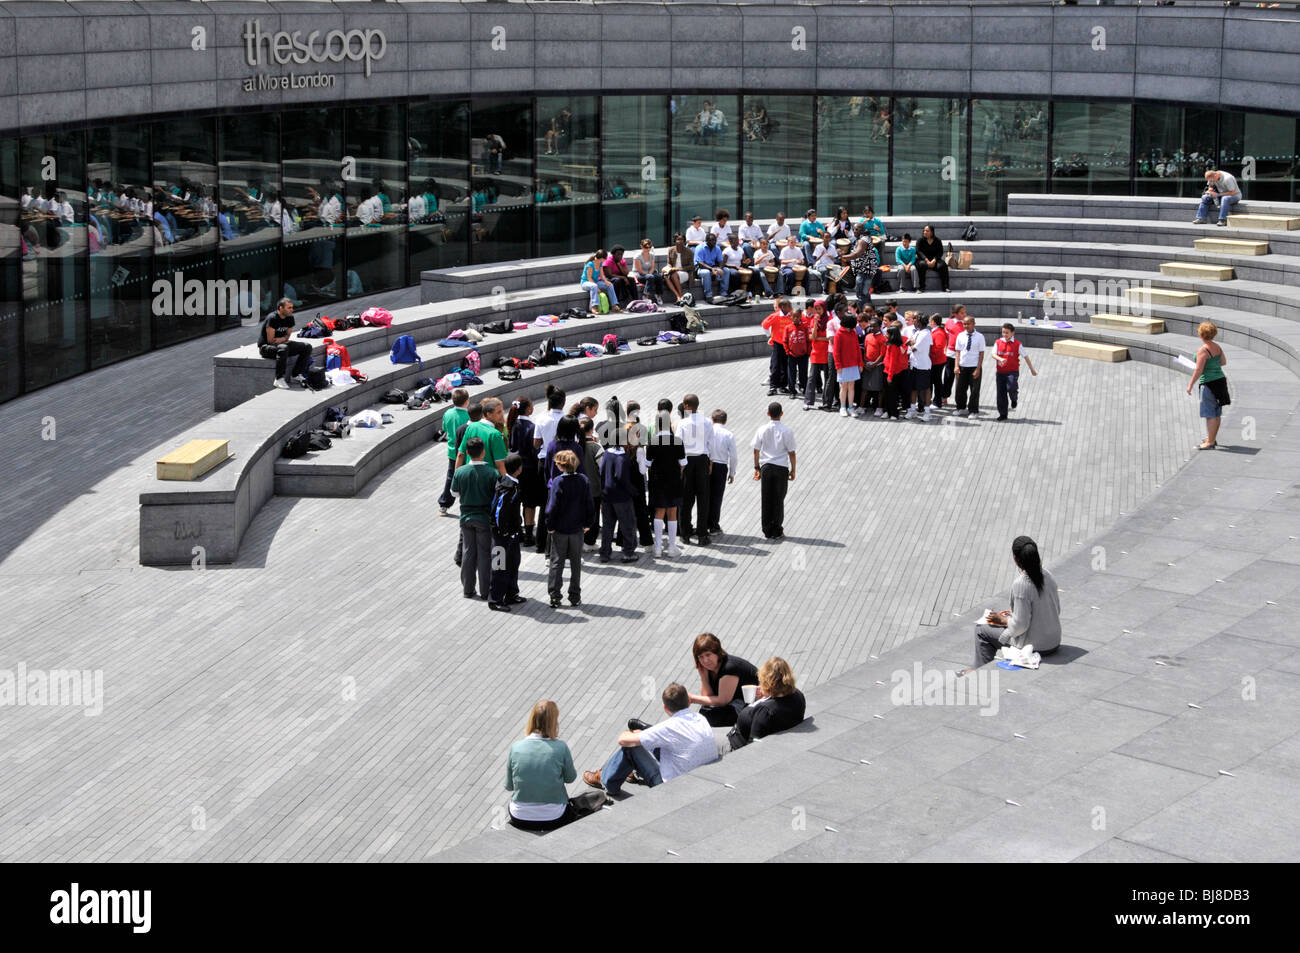 Group of school education trip children in sunshine in the Scoop amphitheatre amphitheater entertainment venue at More London Southwark England UK Stock Photo